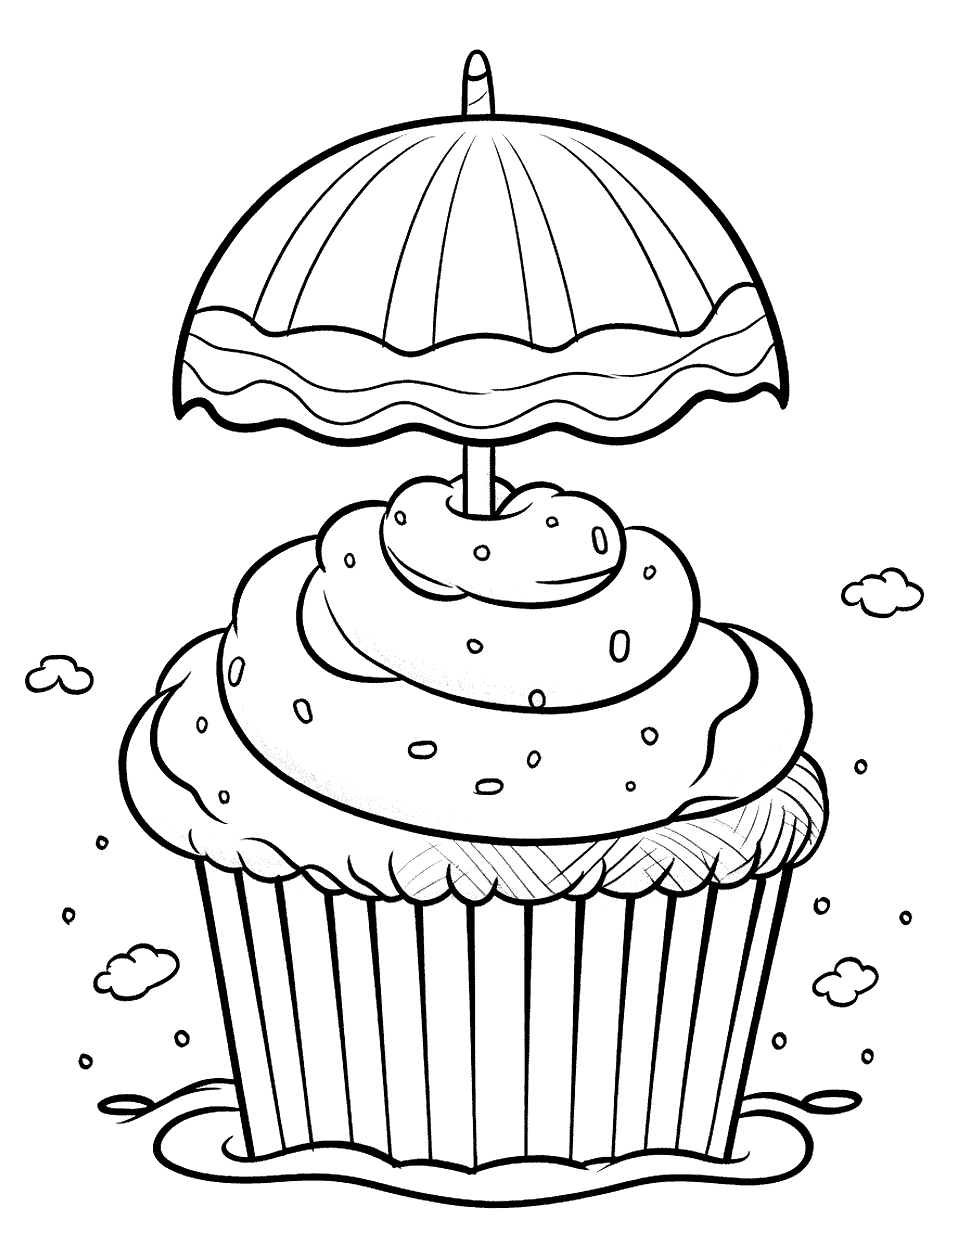 Beach Day Cupcake Coloring Page - A cupcake decorated with a beach theme, including a tiny umbrella.